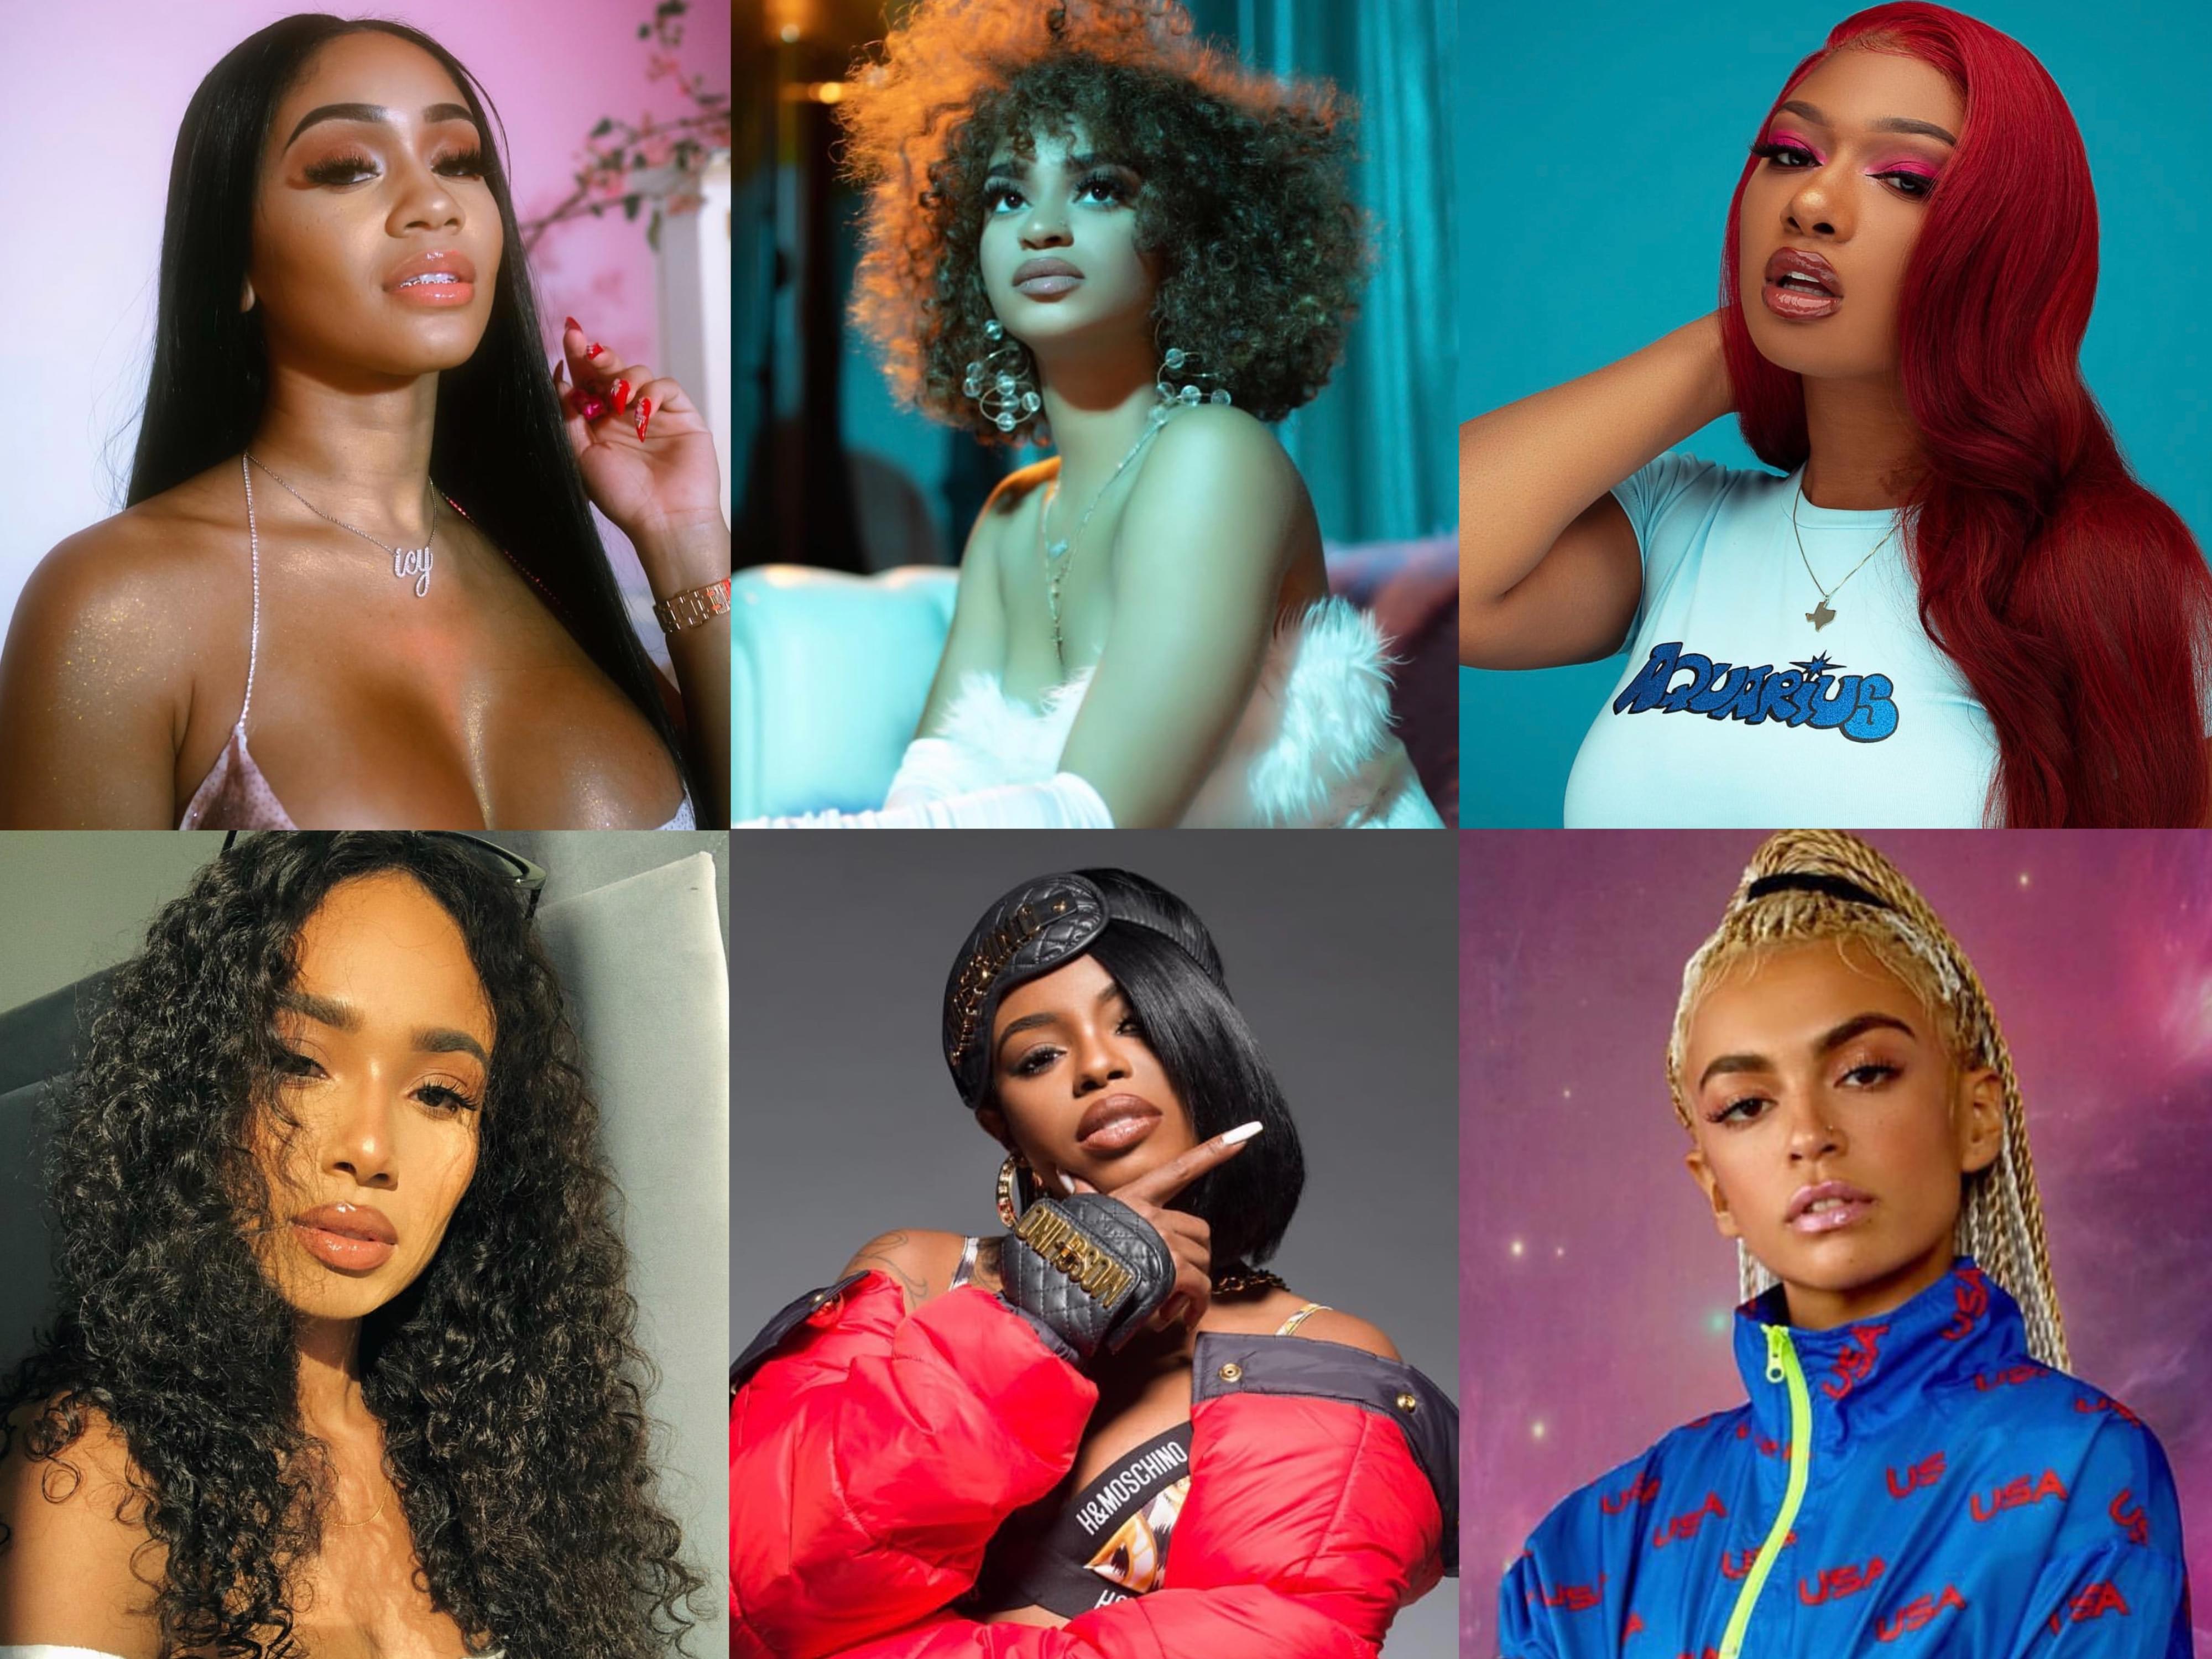 Happy #InternationalWomensDay! Here Are 6 Women In Hip-Hop To Keep Your Eye On